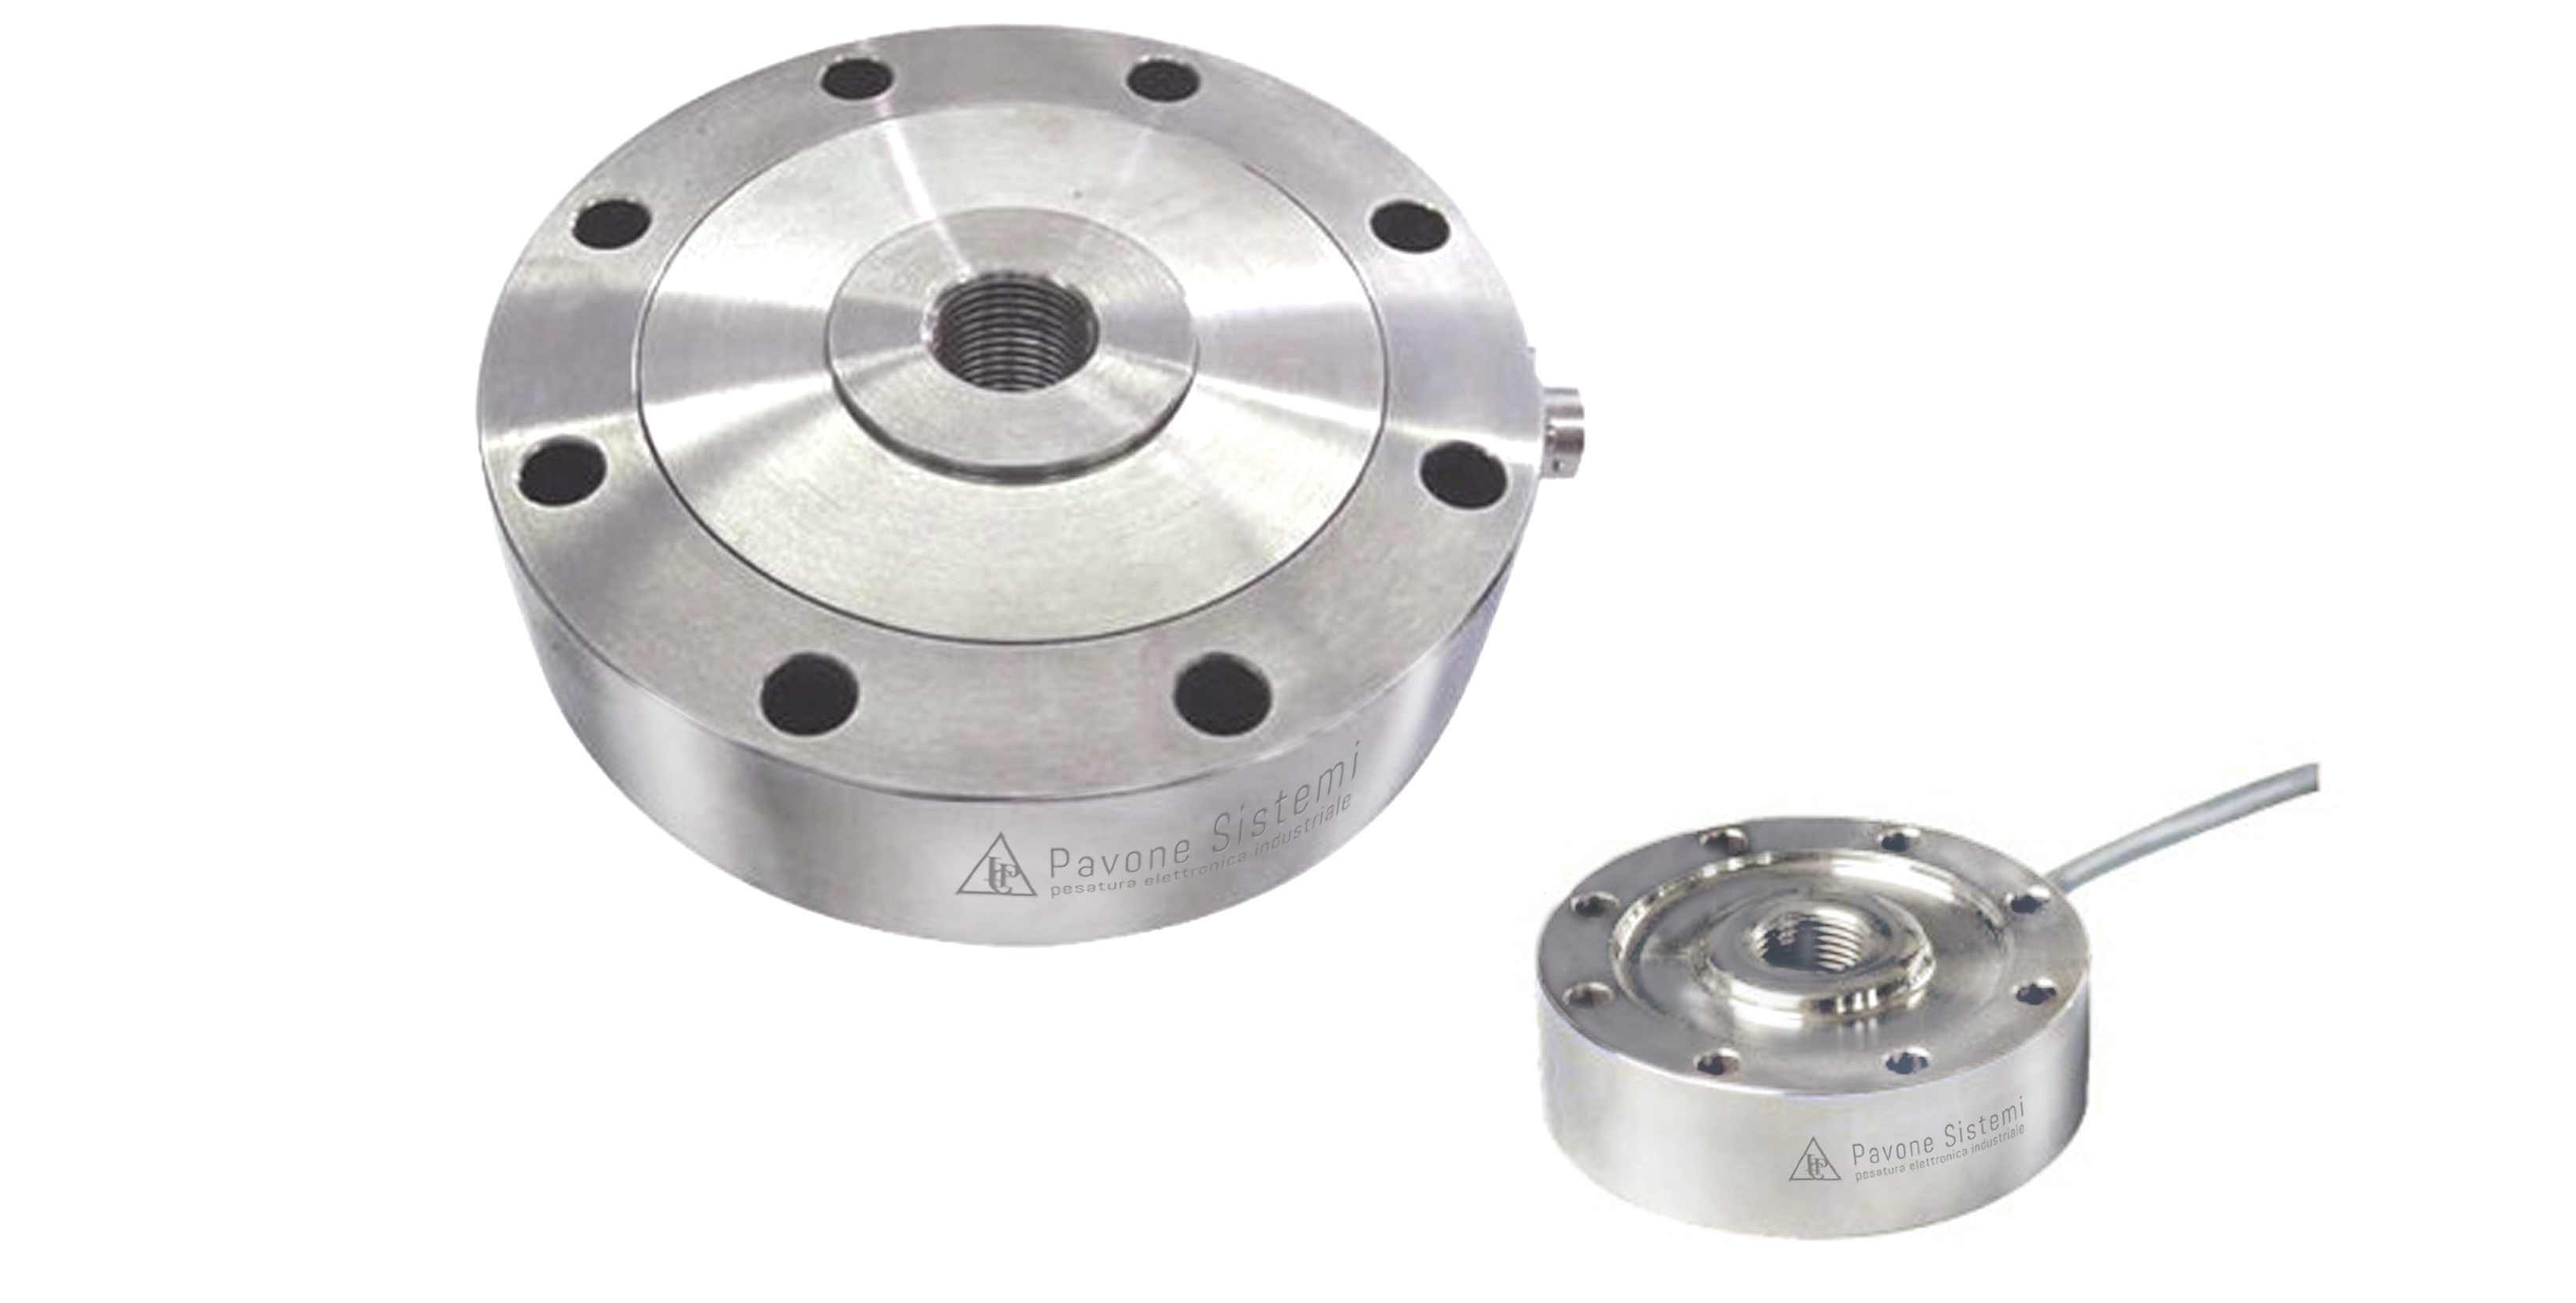 Pavone CVF 200 kN Load Cell